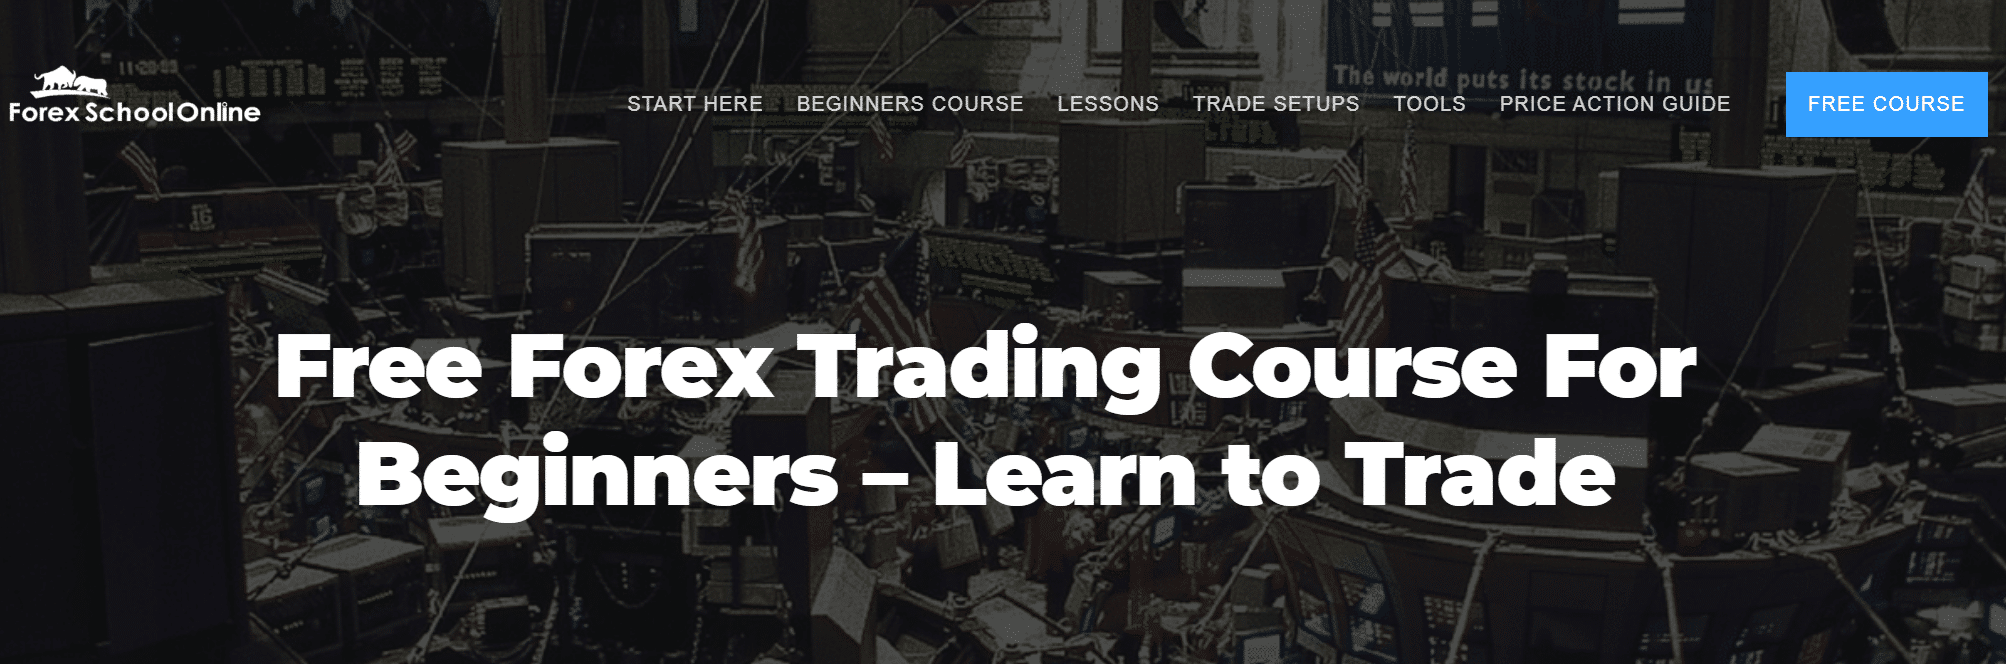 Start free trading course